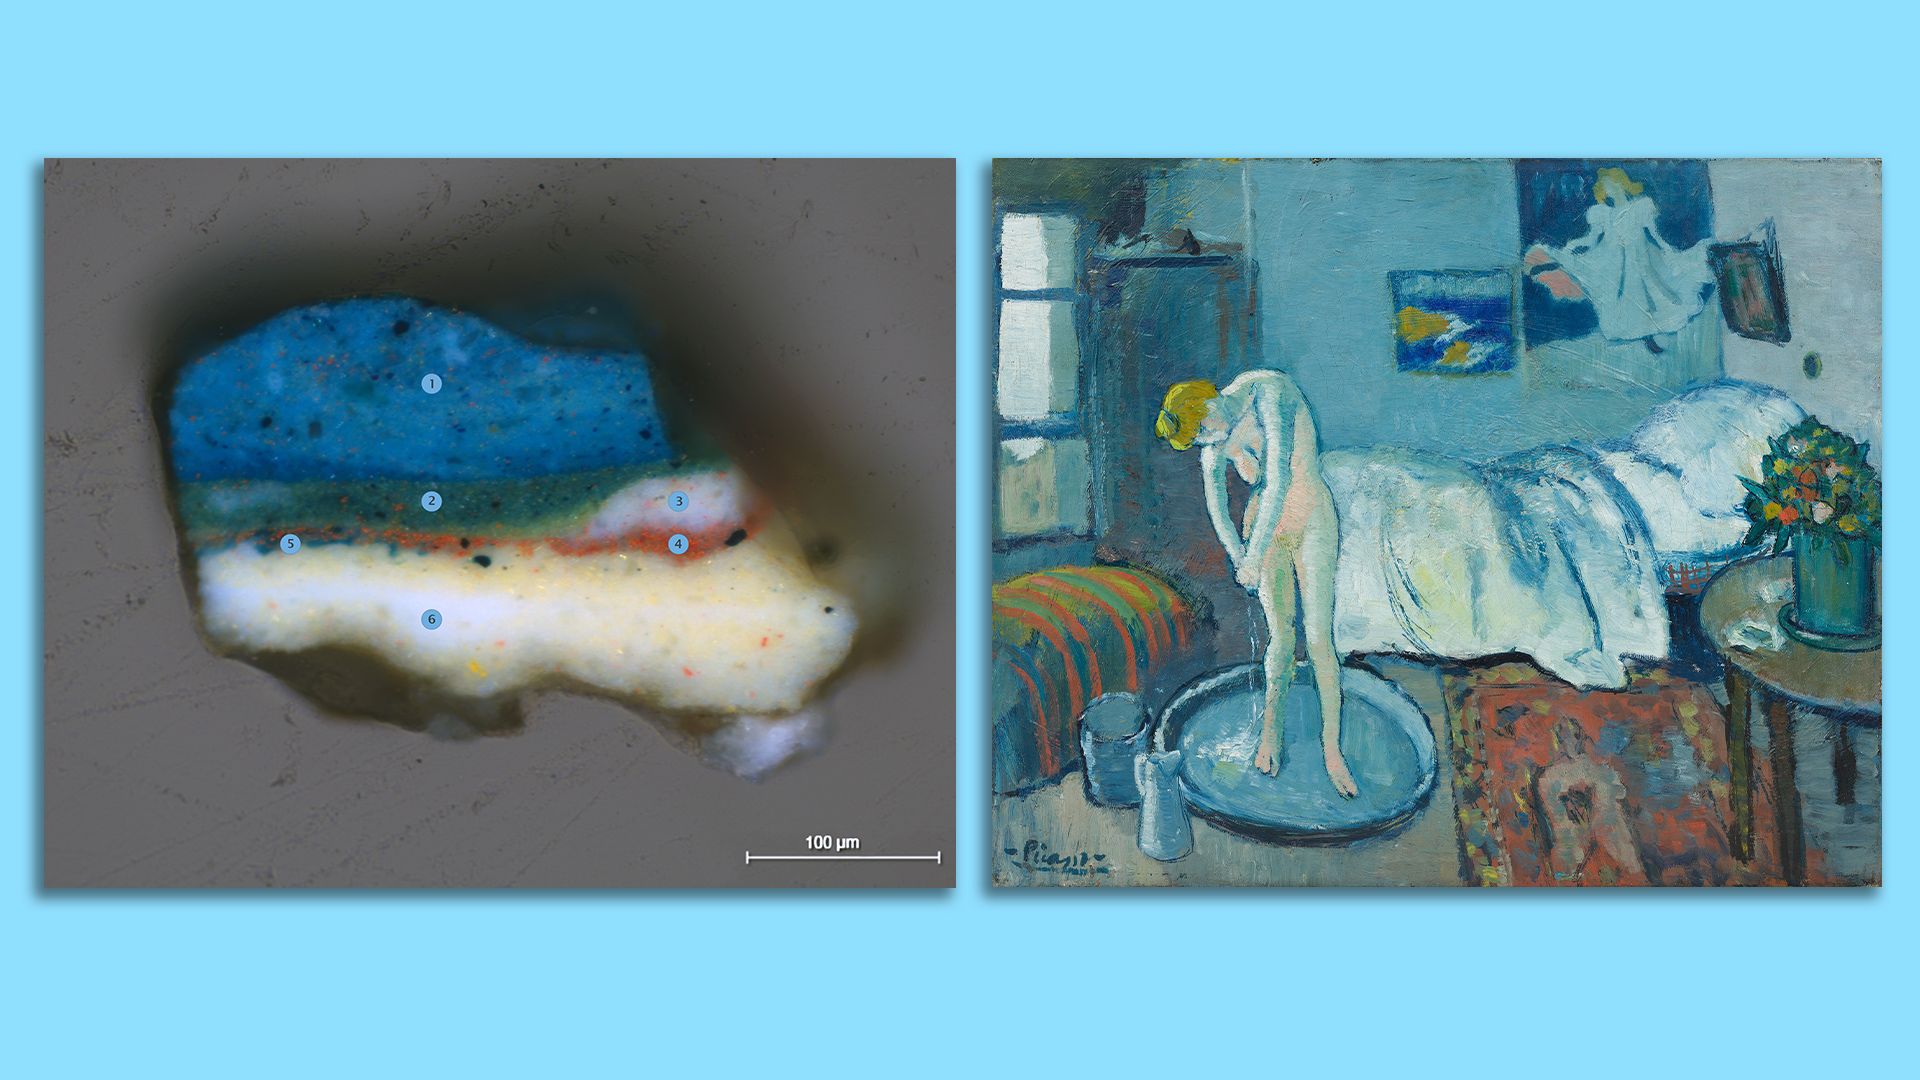 Photo of Picasso's The Blue Room and a close up image of the layers of a paint sample taken from the painting